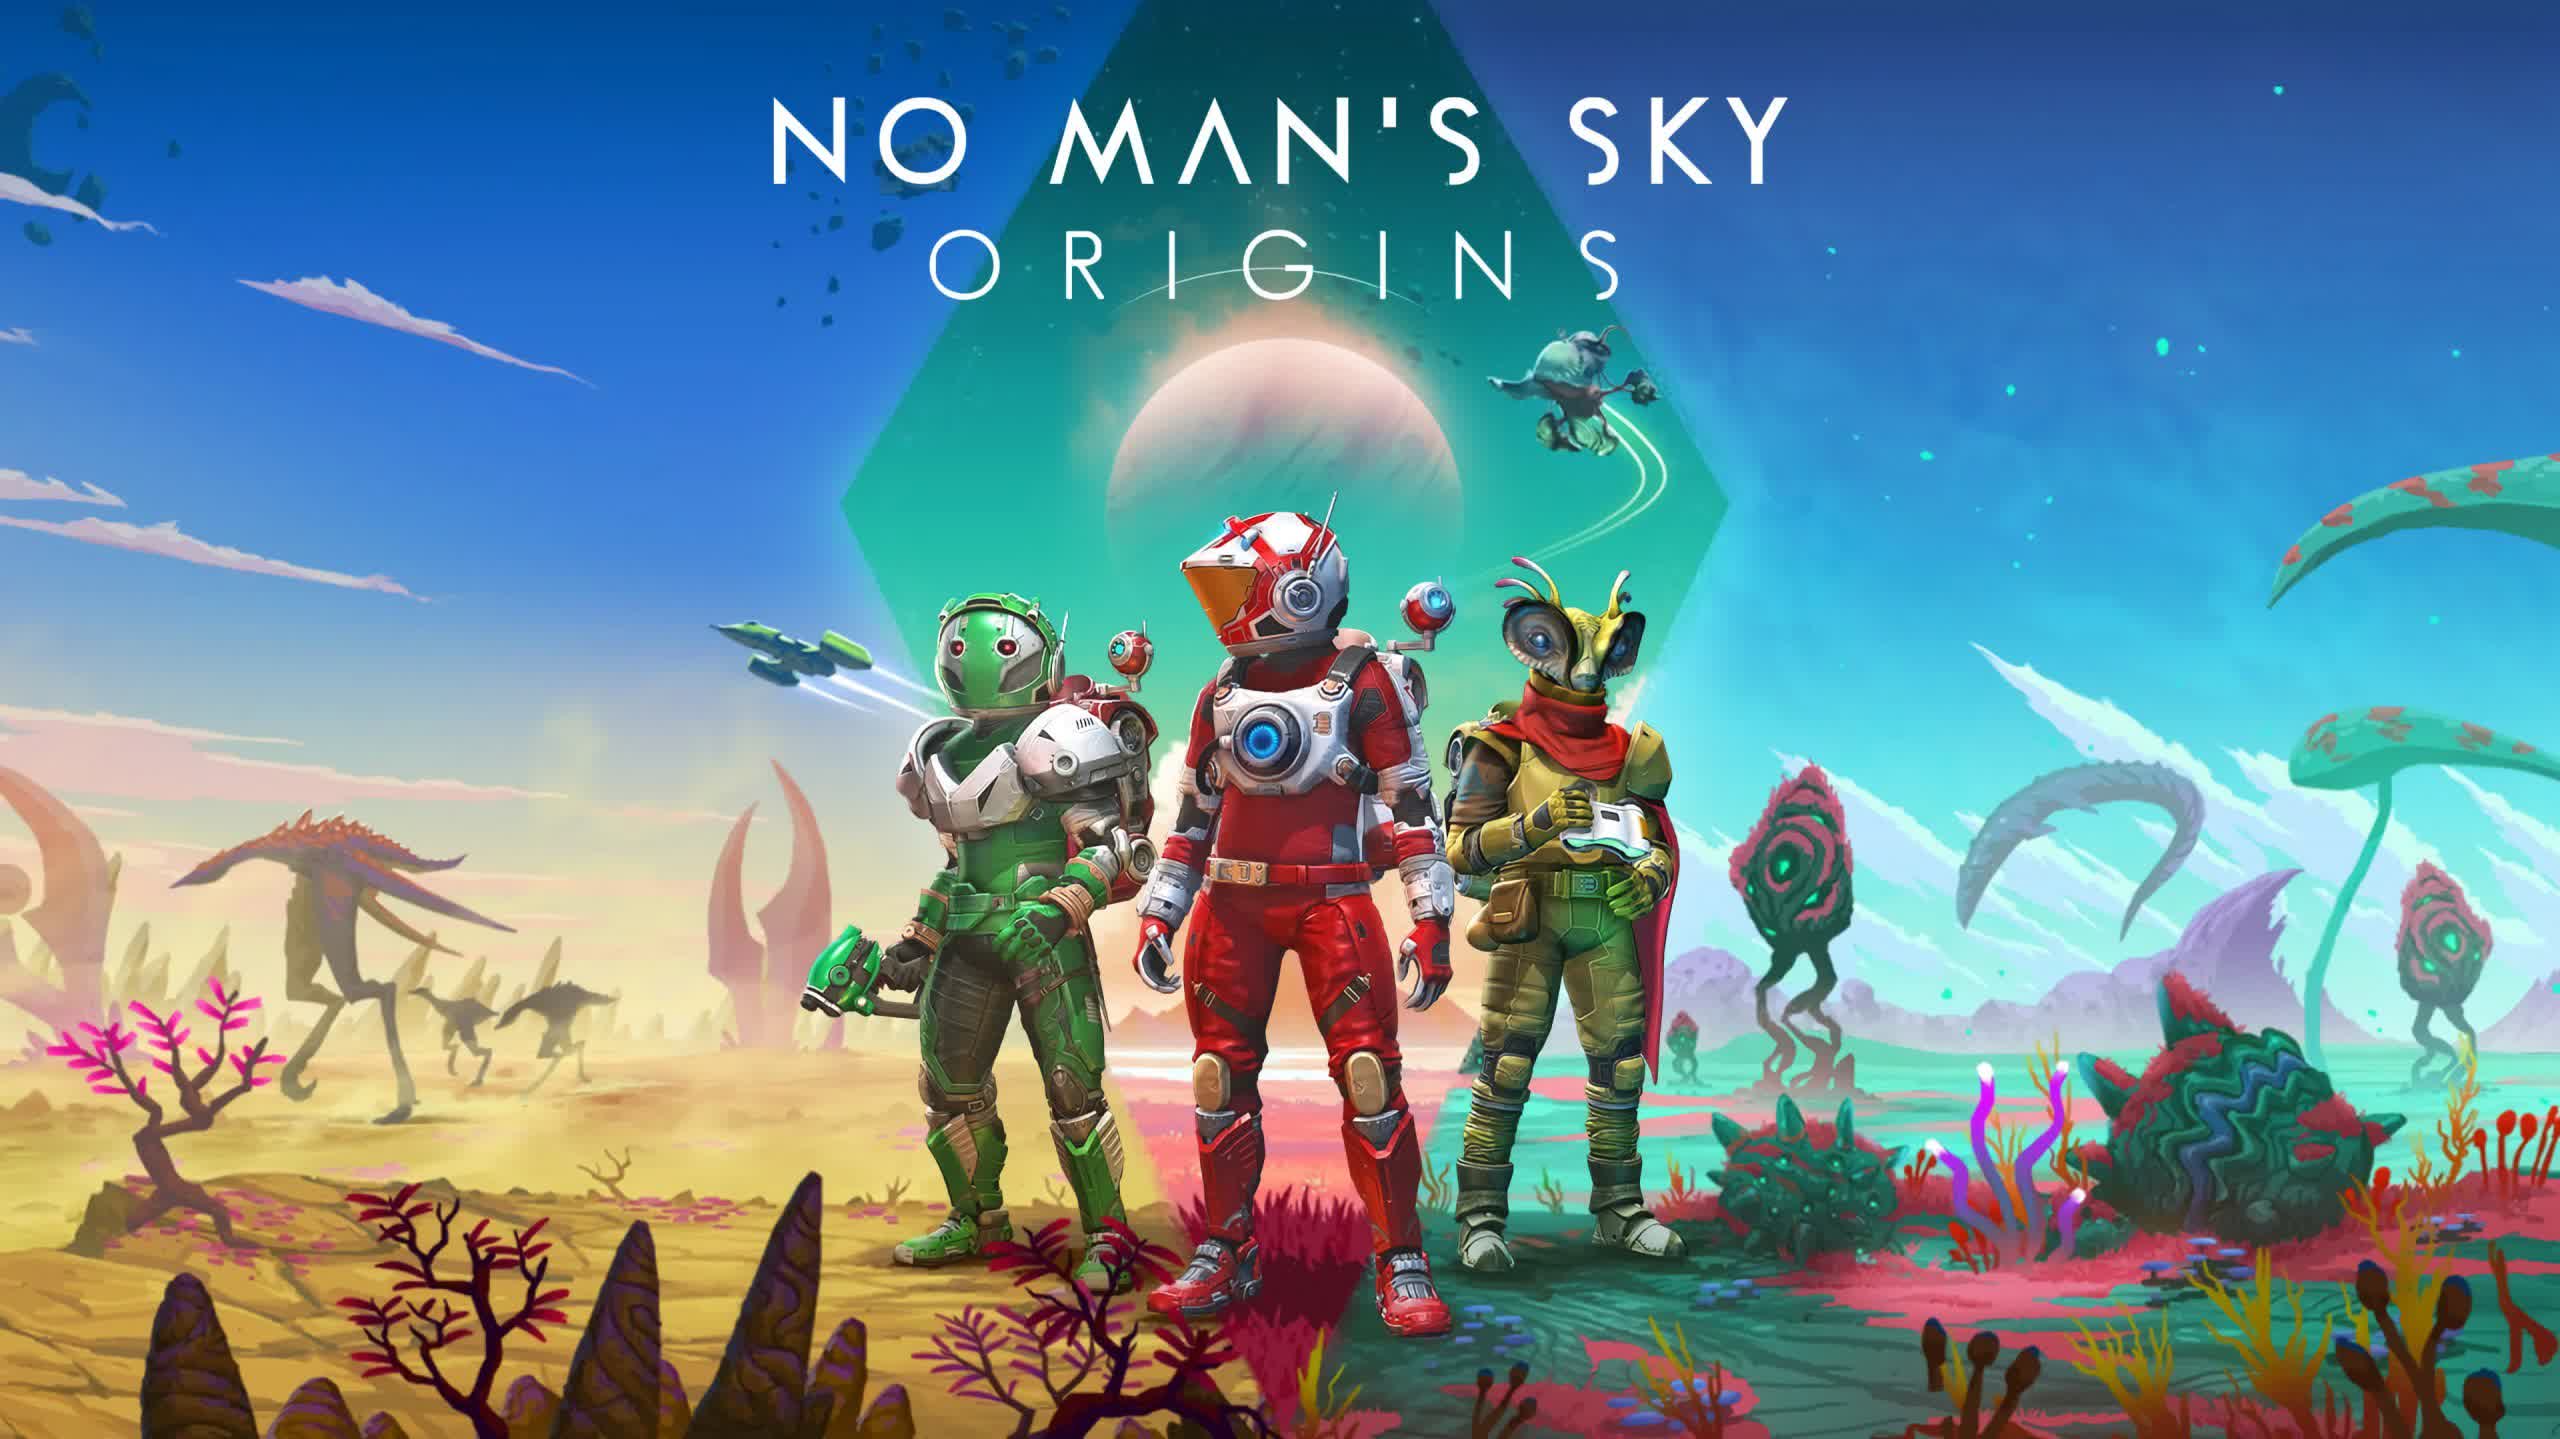 No Man's Sky's 3.0 release 'Origins' gives you giant sandworms